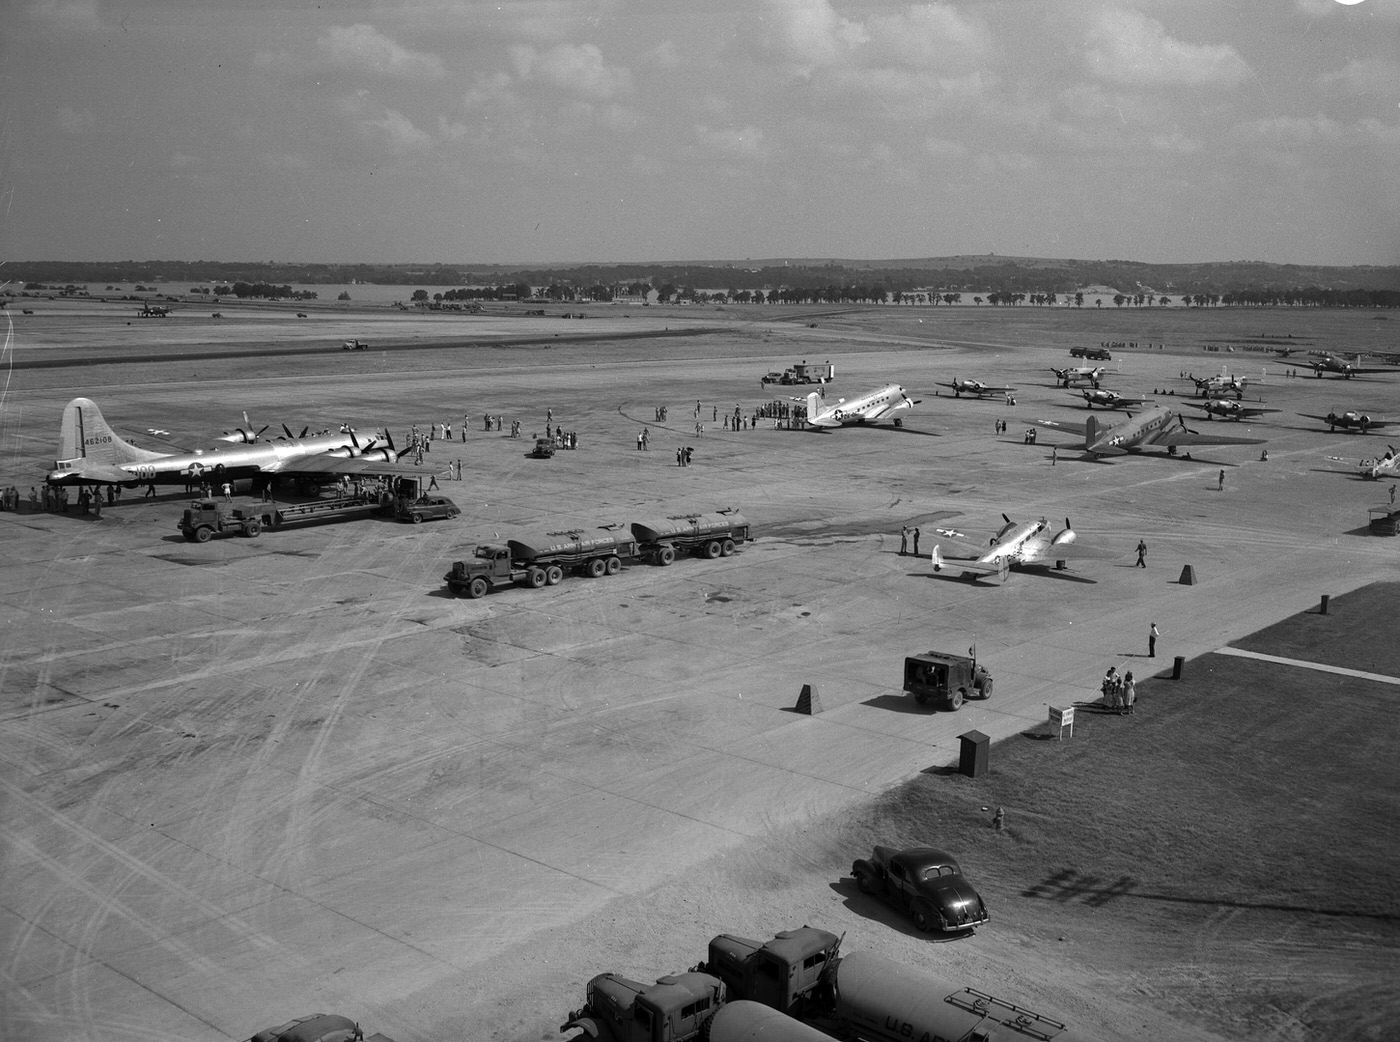 A view of the Fort Worth Army Air Field (FWAAF) on Army Air Forces Day. The air field is pictured early in the day from an air traffic control tower, 1946